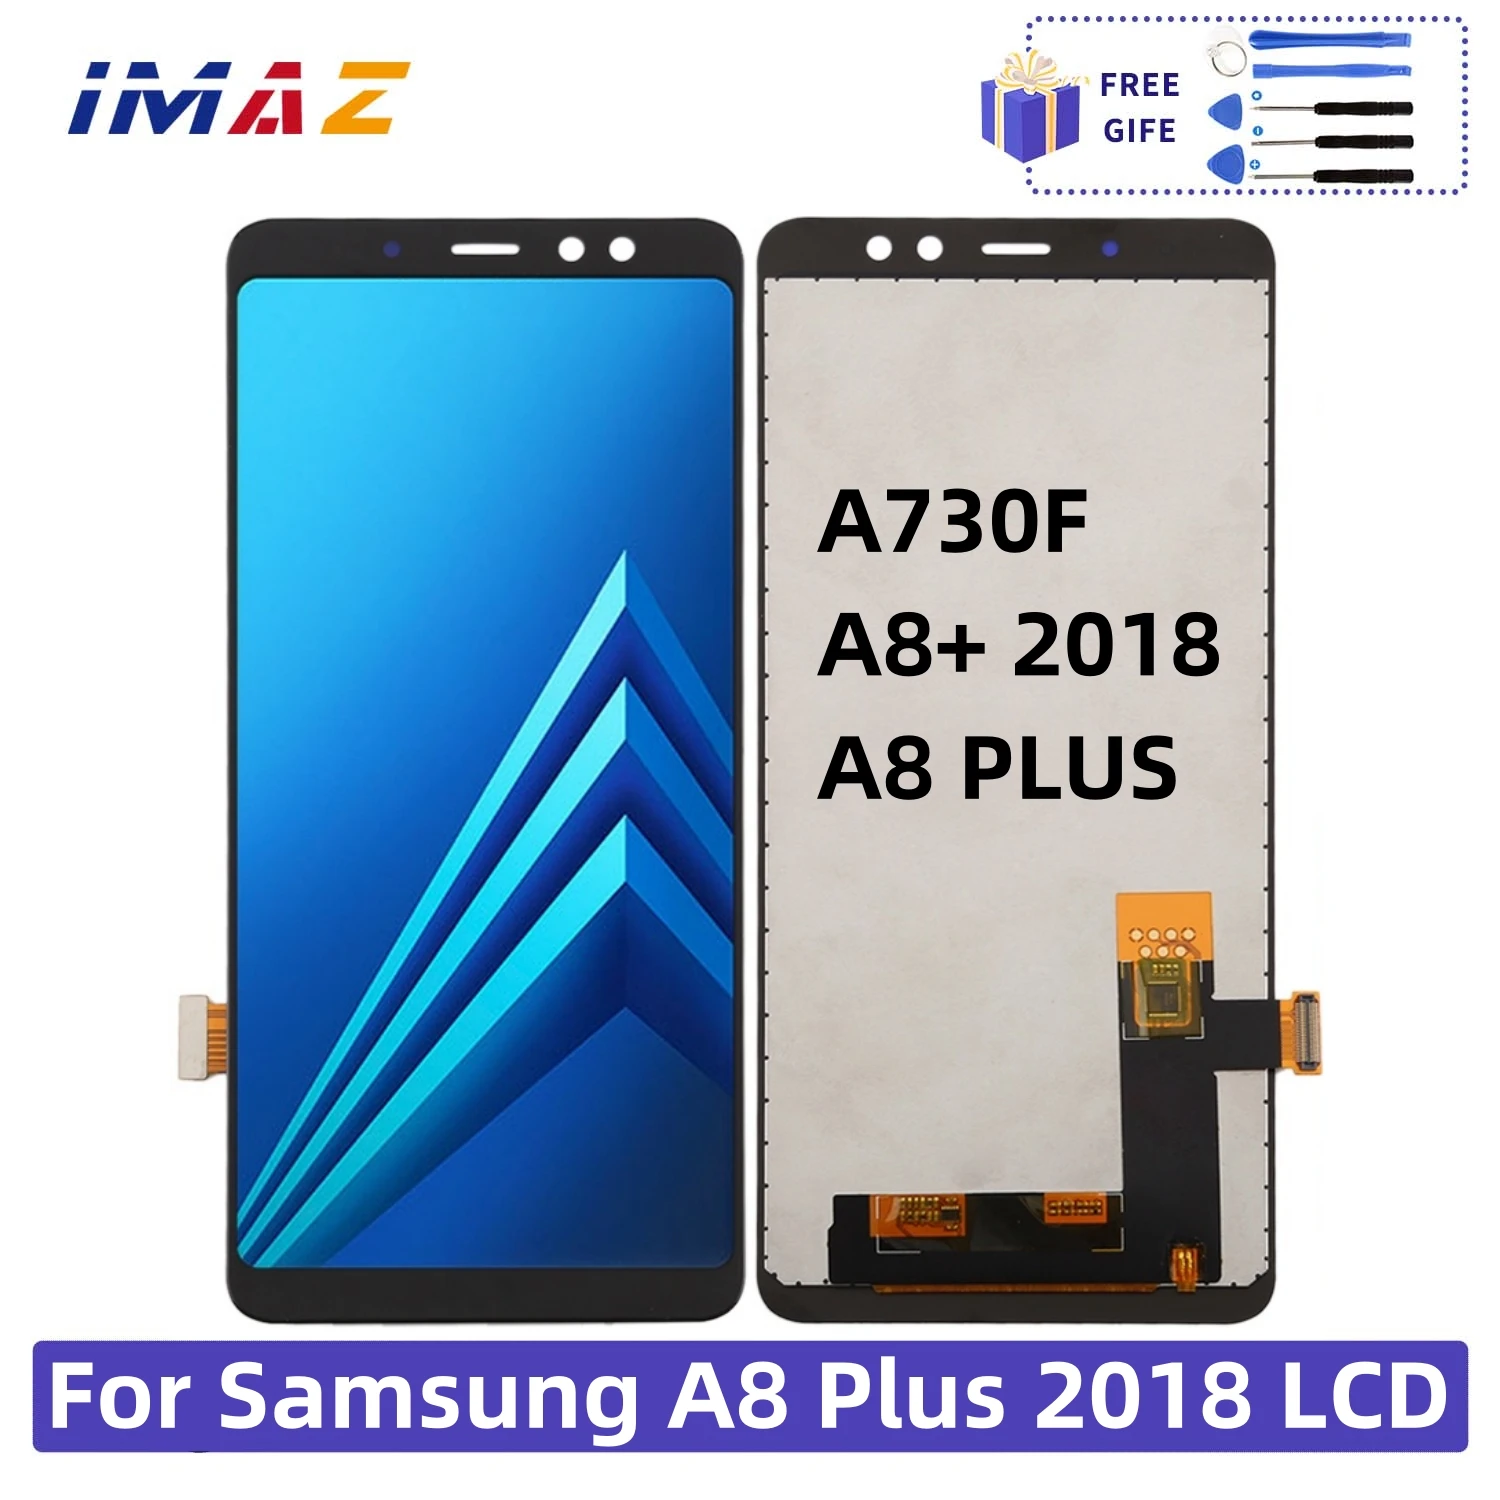 

LCD For Samsung Galaxy A8 Plus 2018 A730 Display Touch Screen SM-A730F Digitizer Panel Assembly Replacement For Galaxy A8+ 2018